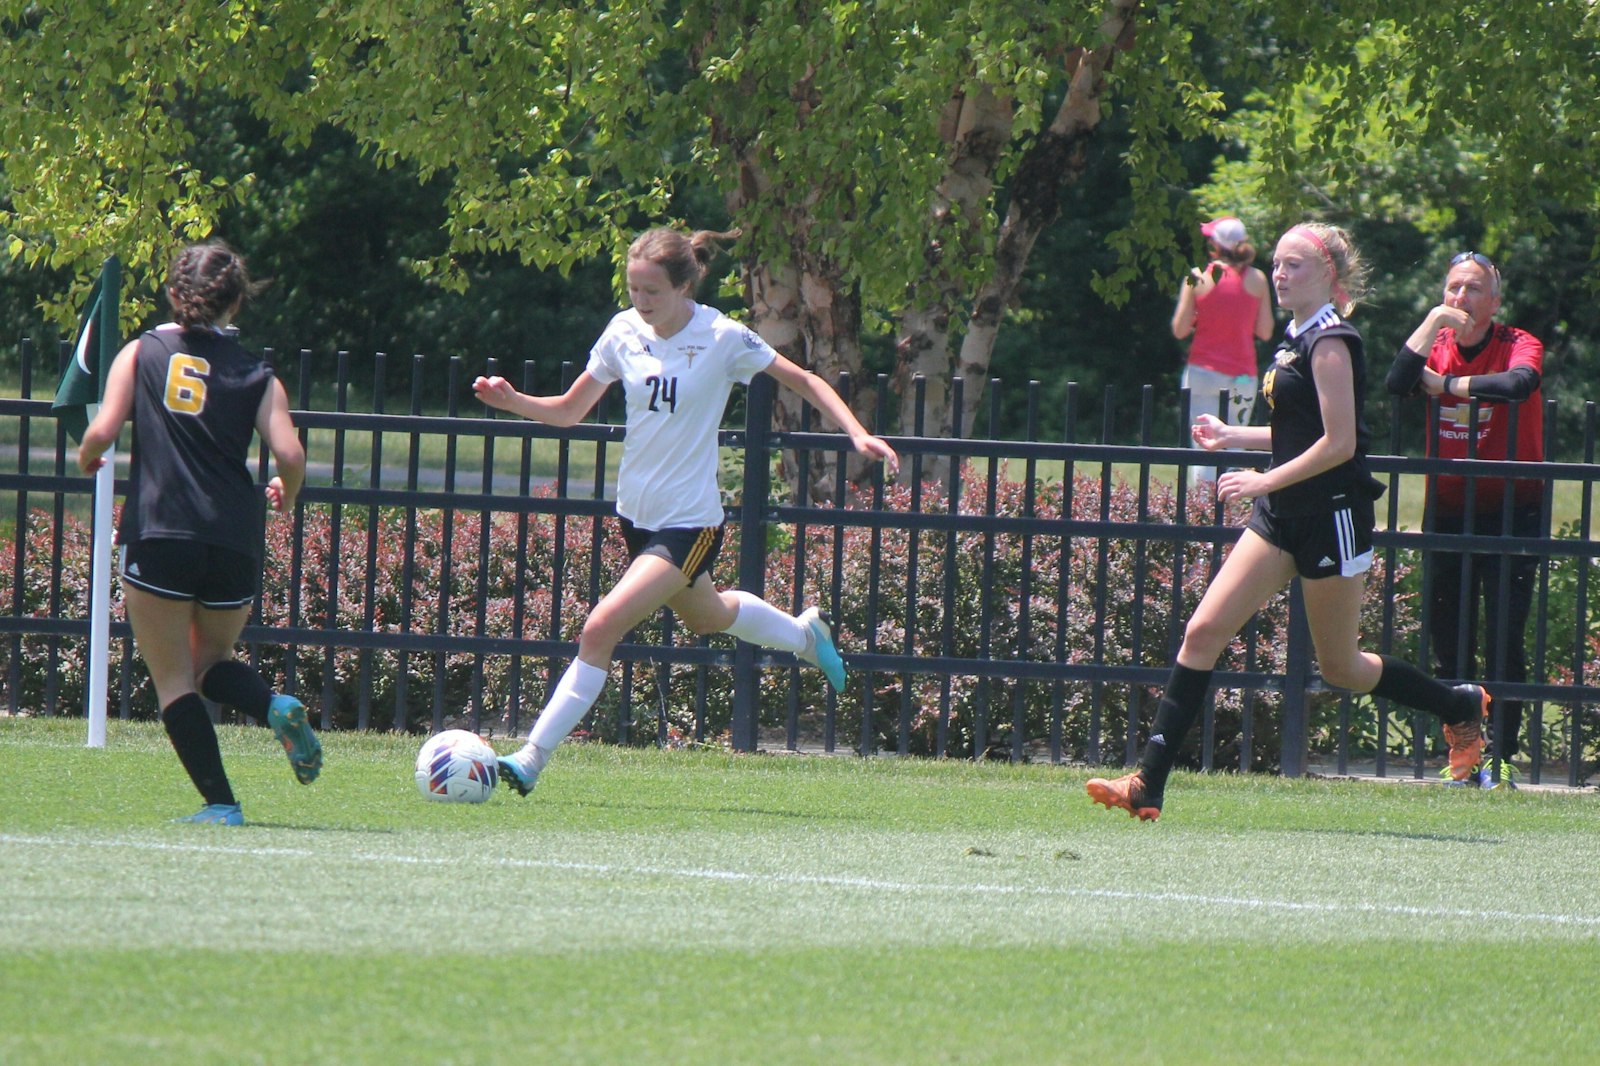 Erica Walker, whose goal in the semi-final earned the Mountaineers a berth in the championship game, takes the ball in from the right side of the goal box while being pursued by Kalamazoo Christian’s Maysen Steensma and Phoebe Zeyl.